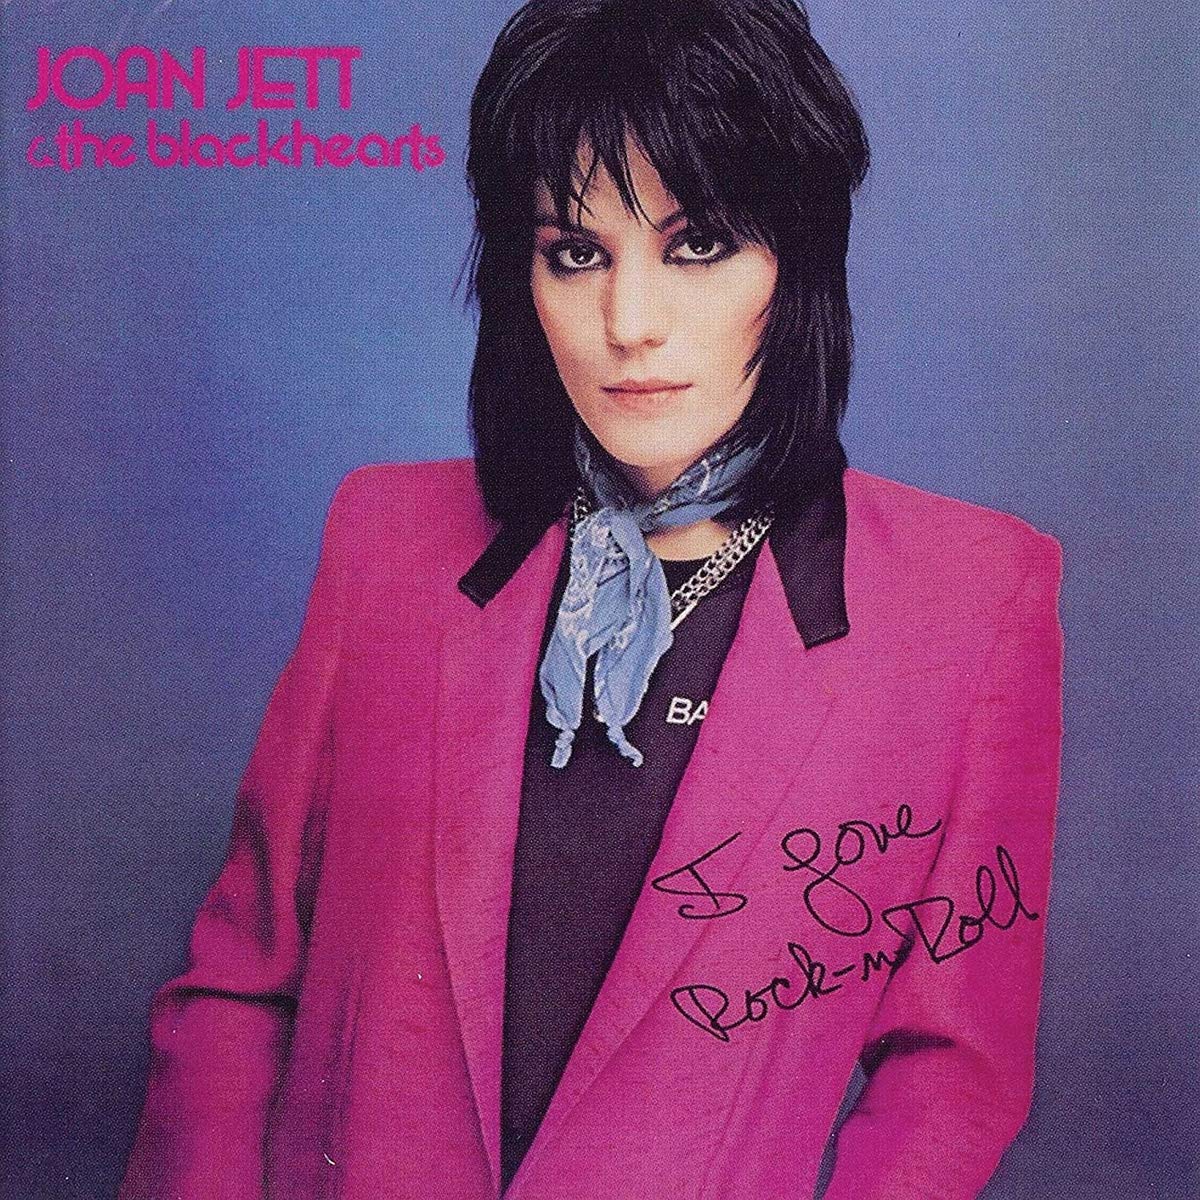 Joan Jett – I Love Rock ‘n’ Roll – to be Featured on The Inner Groove